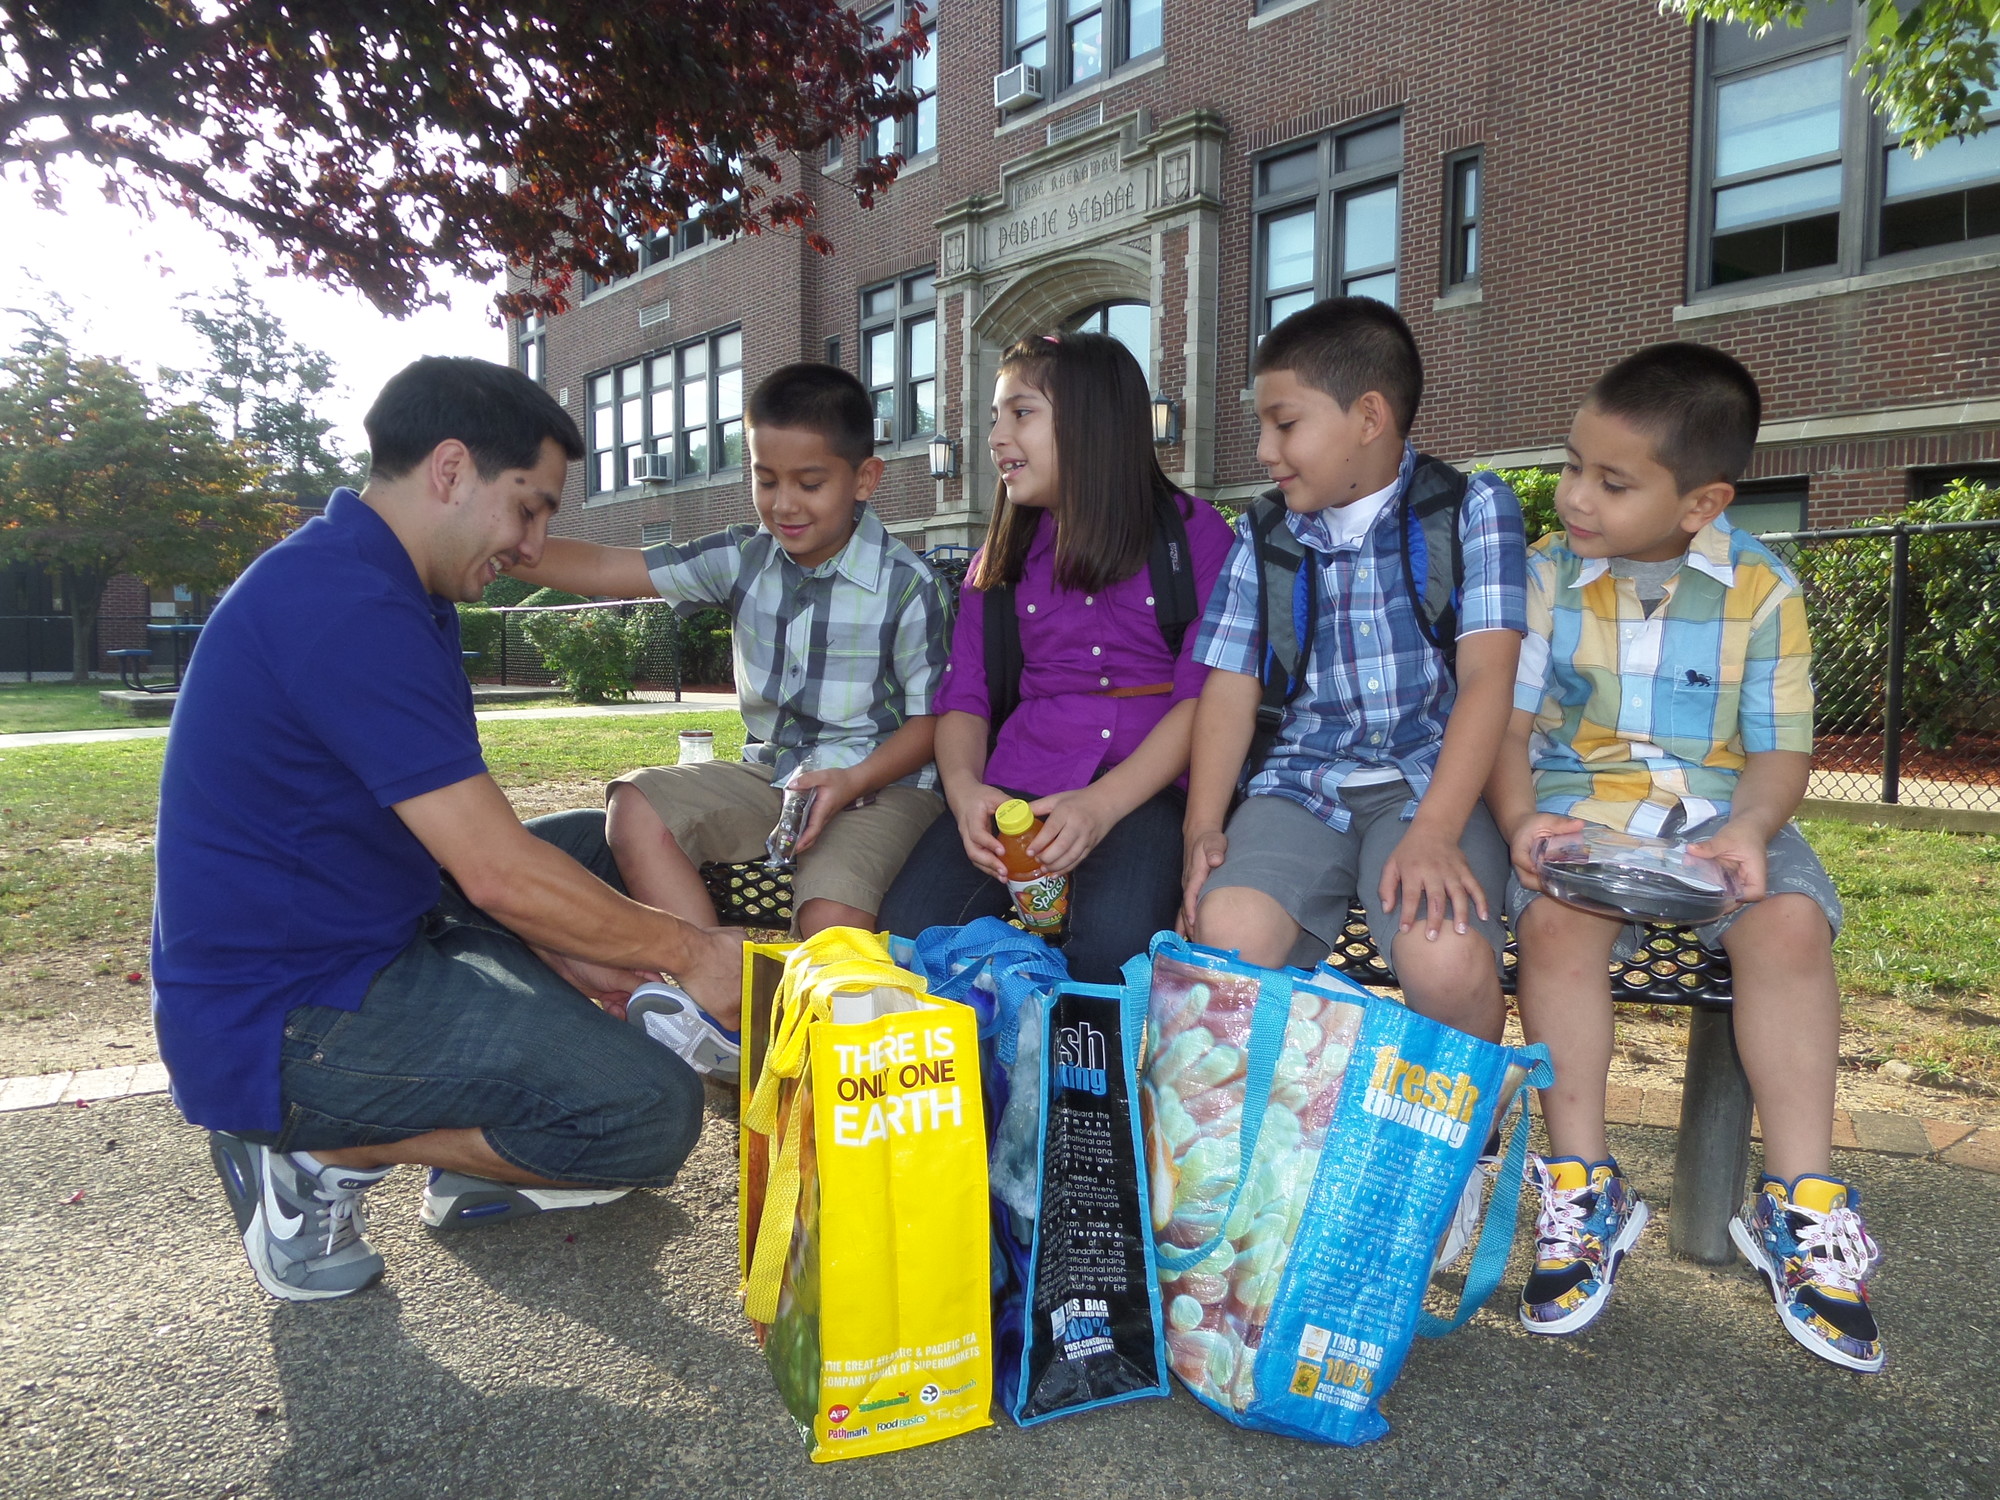 Andres Vanegas did a final check of his children's outfits after they arrived at Centre Avenue Elementary in East Rockaway for their first day of school on Tuesday. Seated from left were Dylan, Chloe, Elias, and Fabian